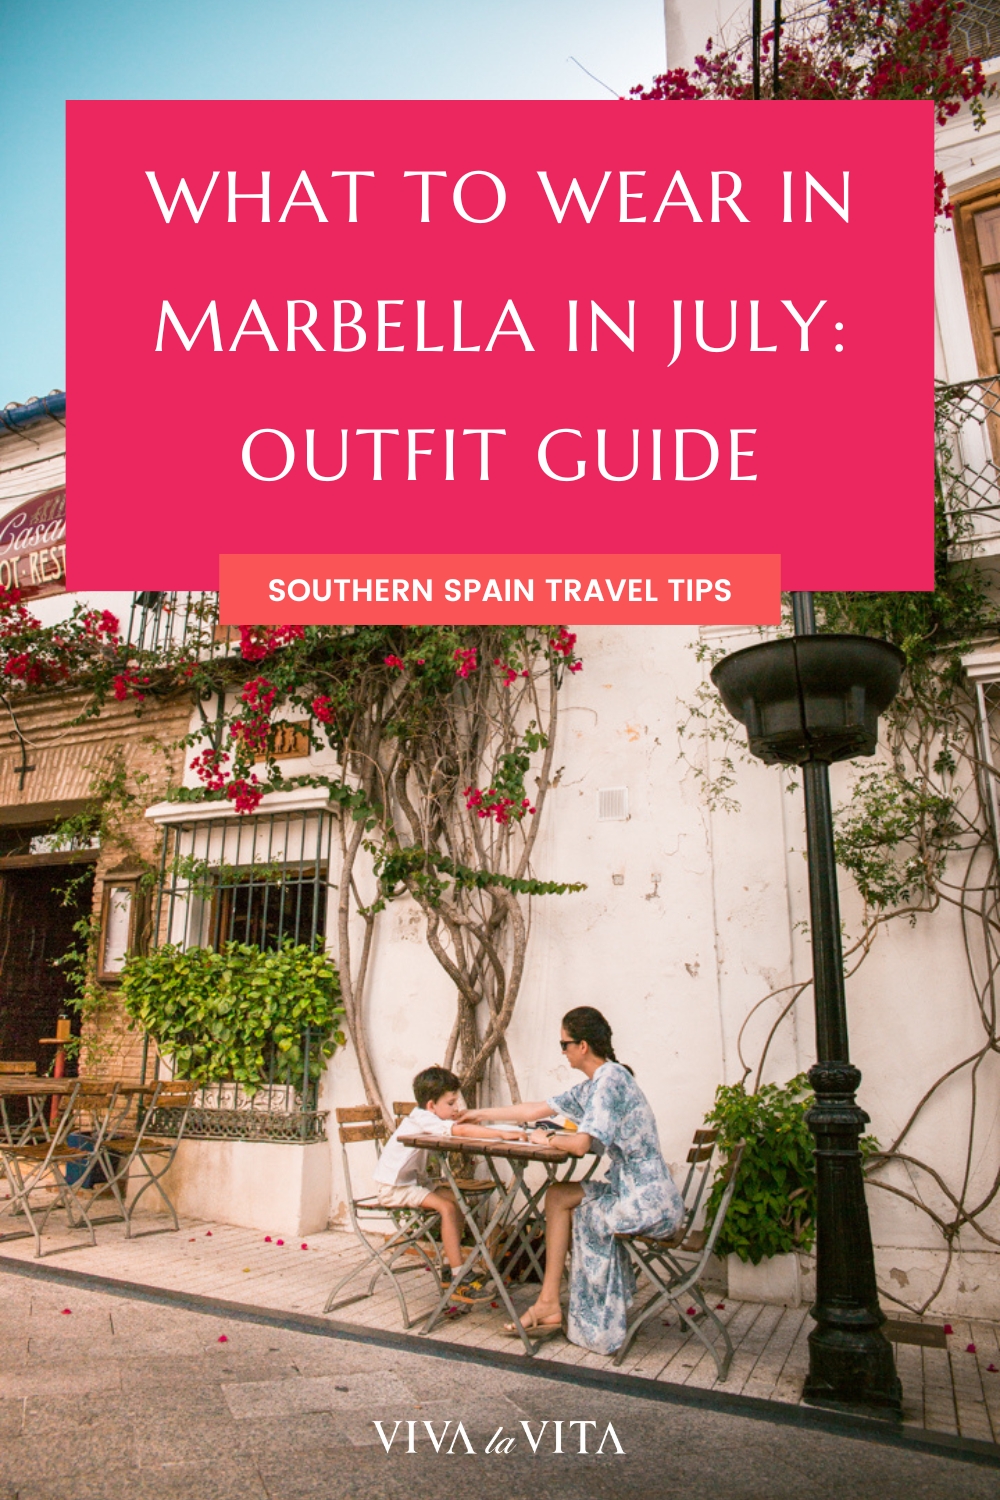 PIn image for an article about what to wear in marbella in July